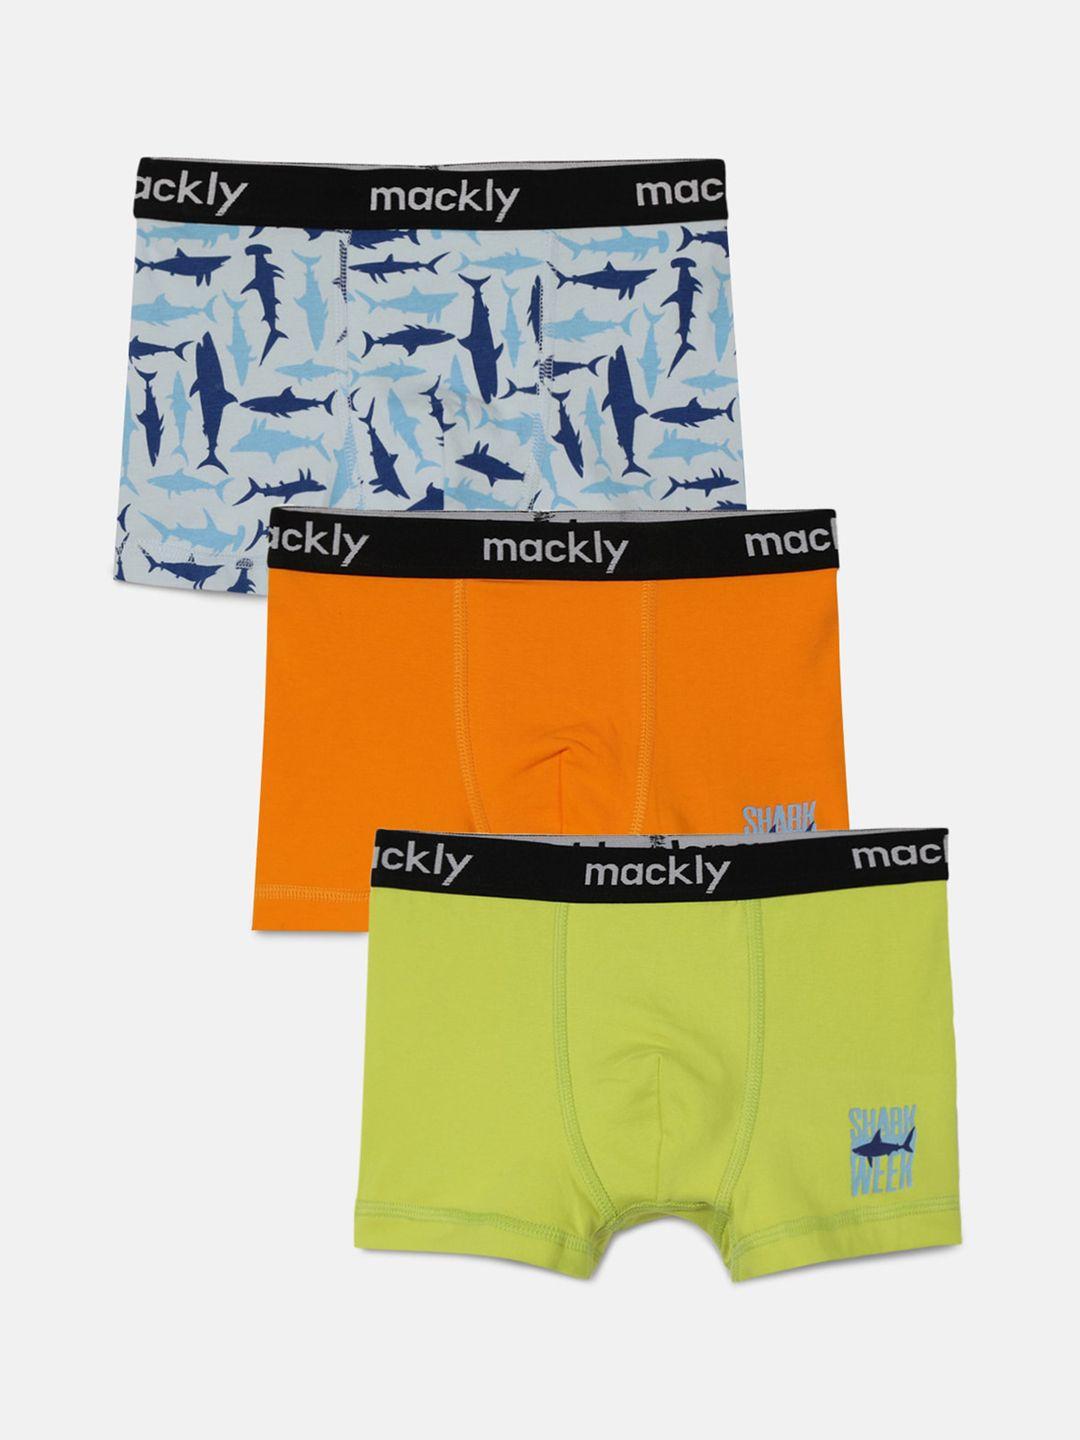 mackly boys pack of 3 trunks